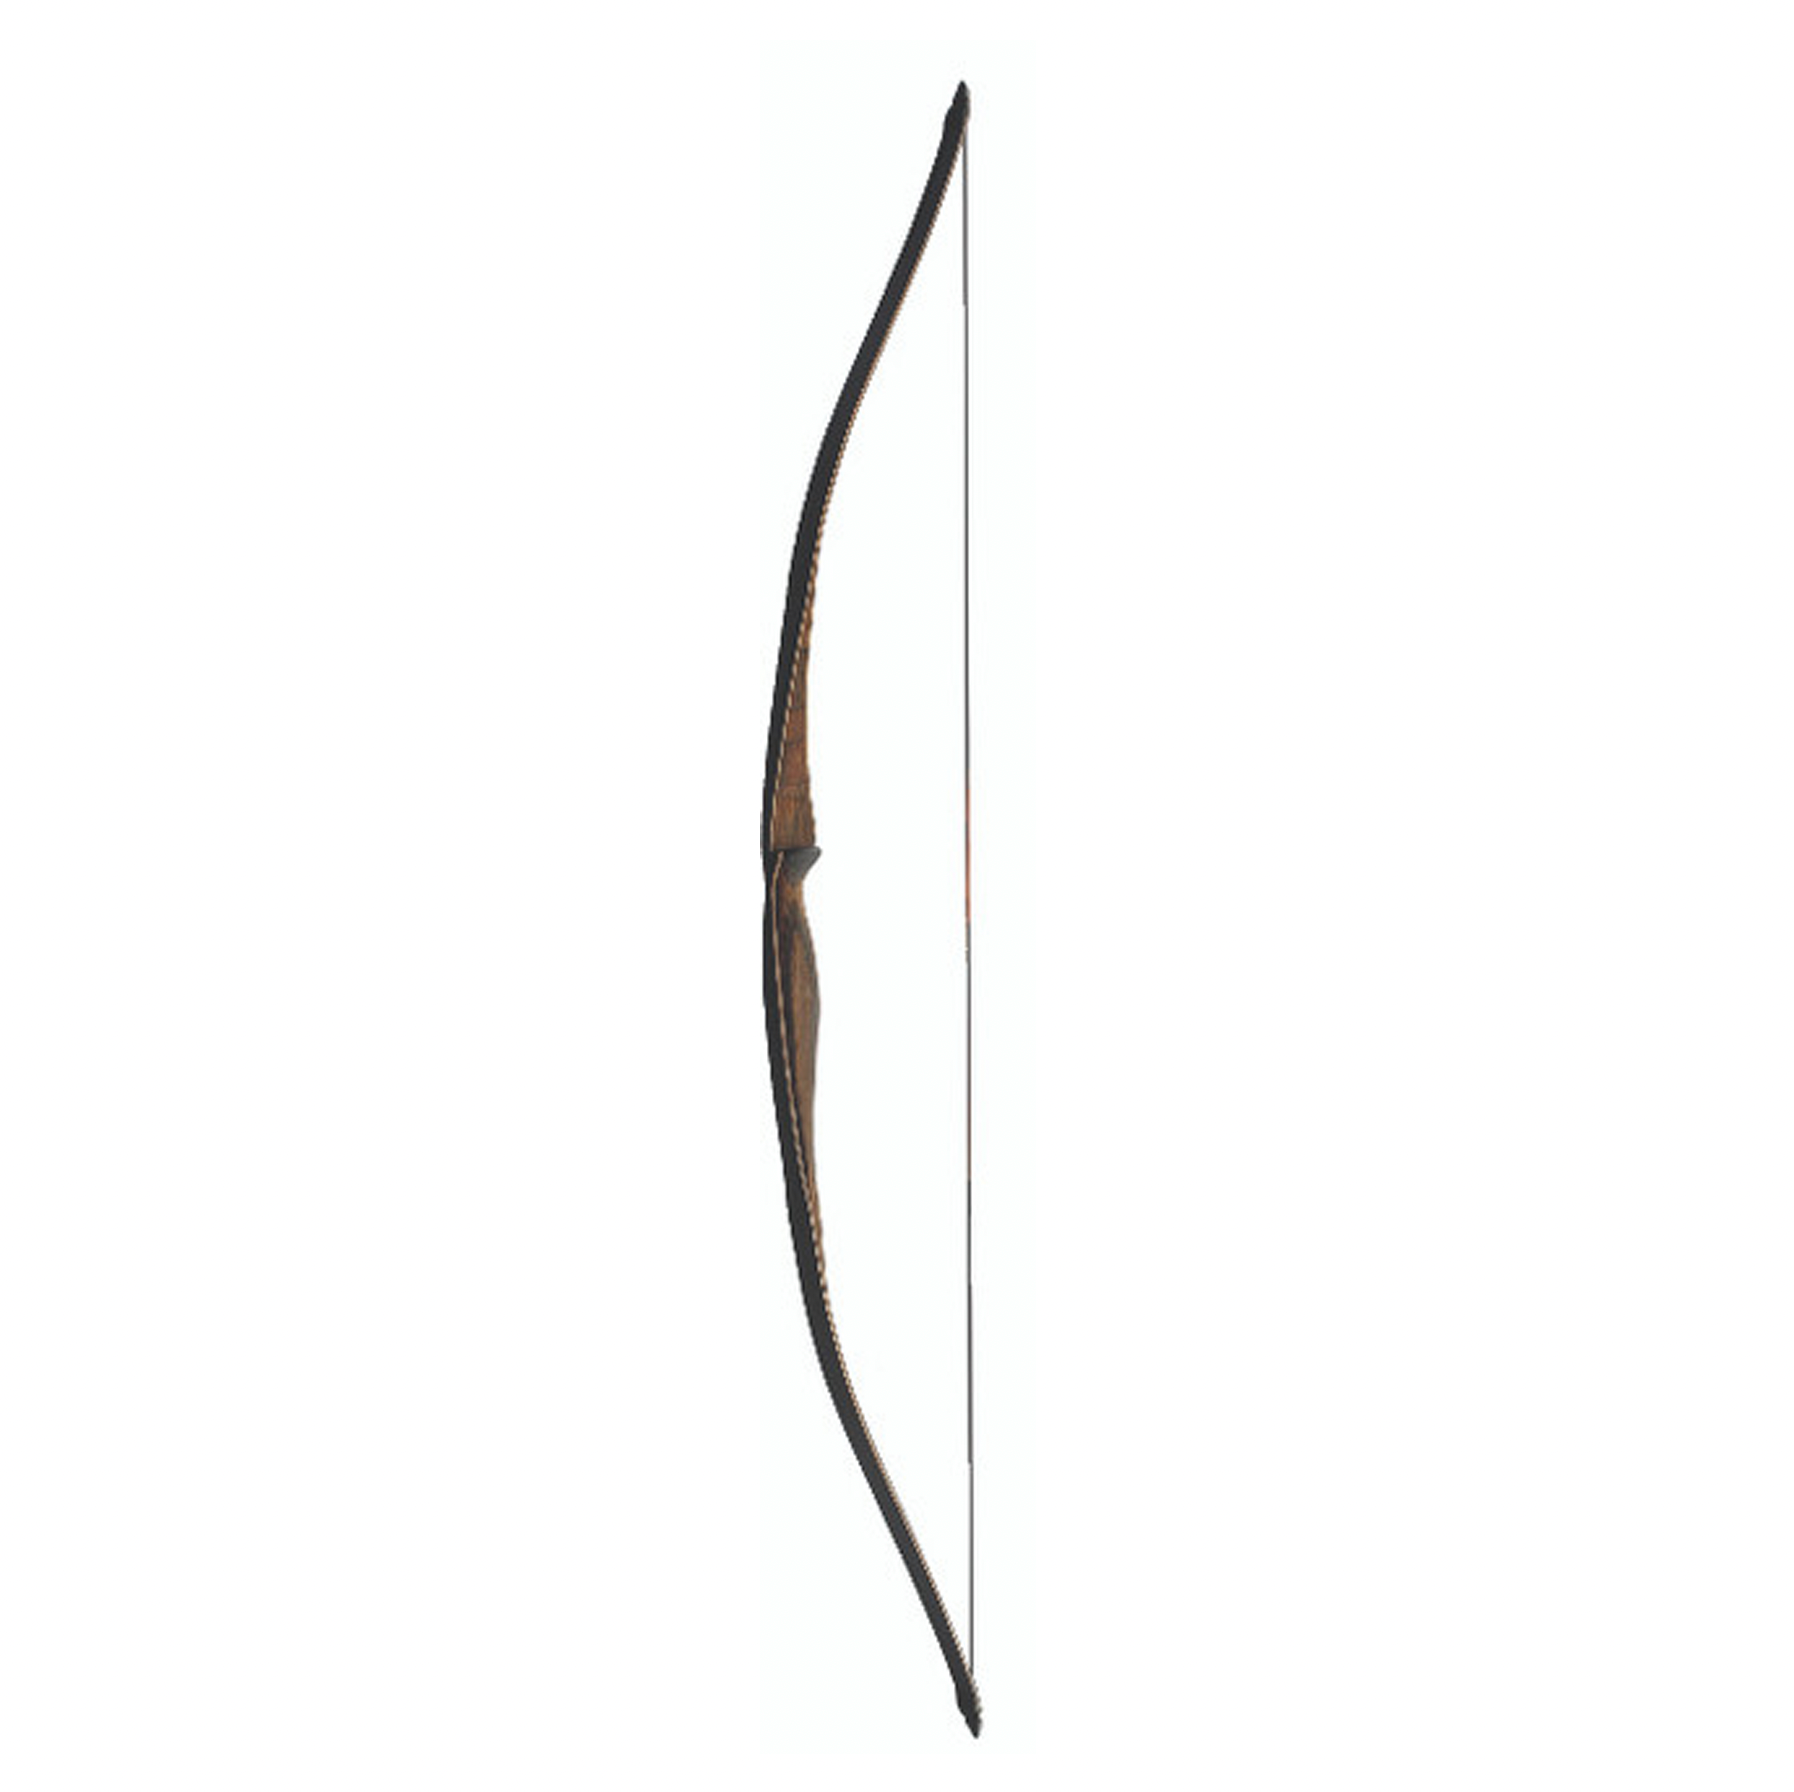 Greatree Tory Long Bow